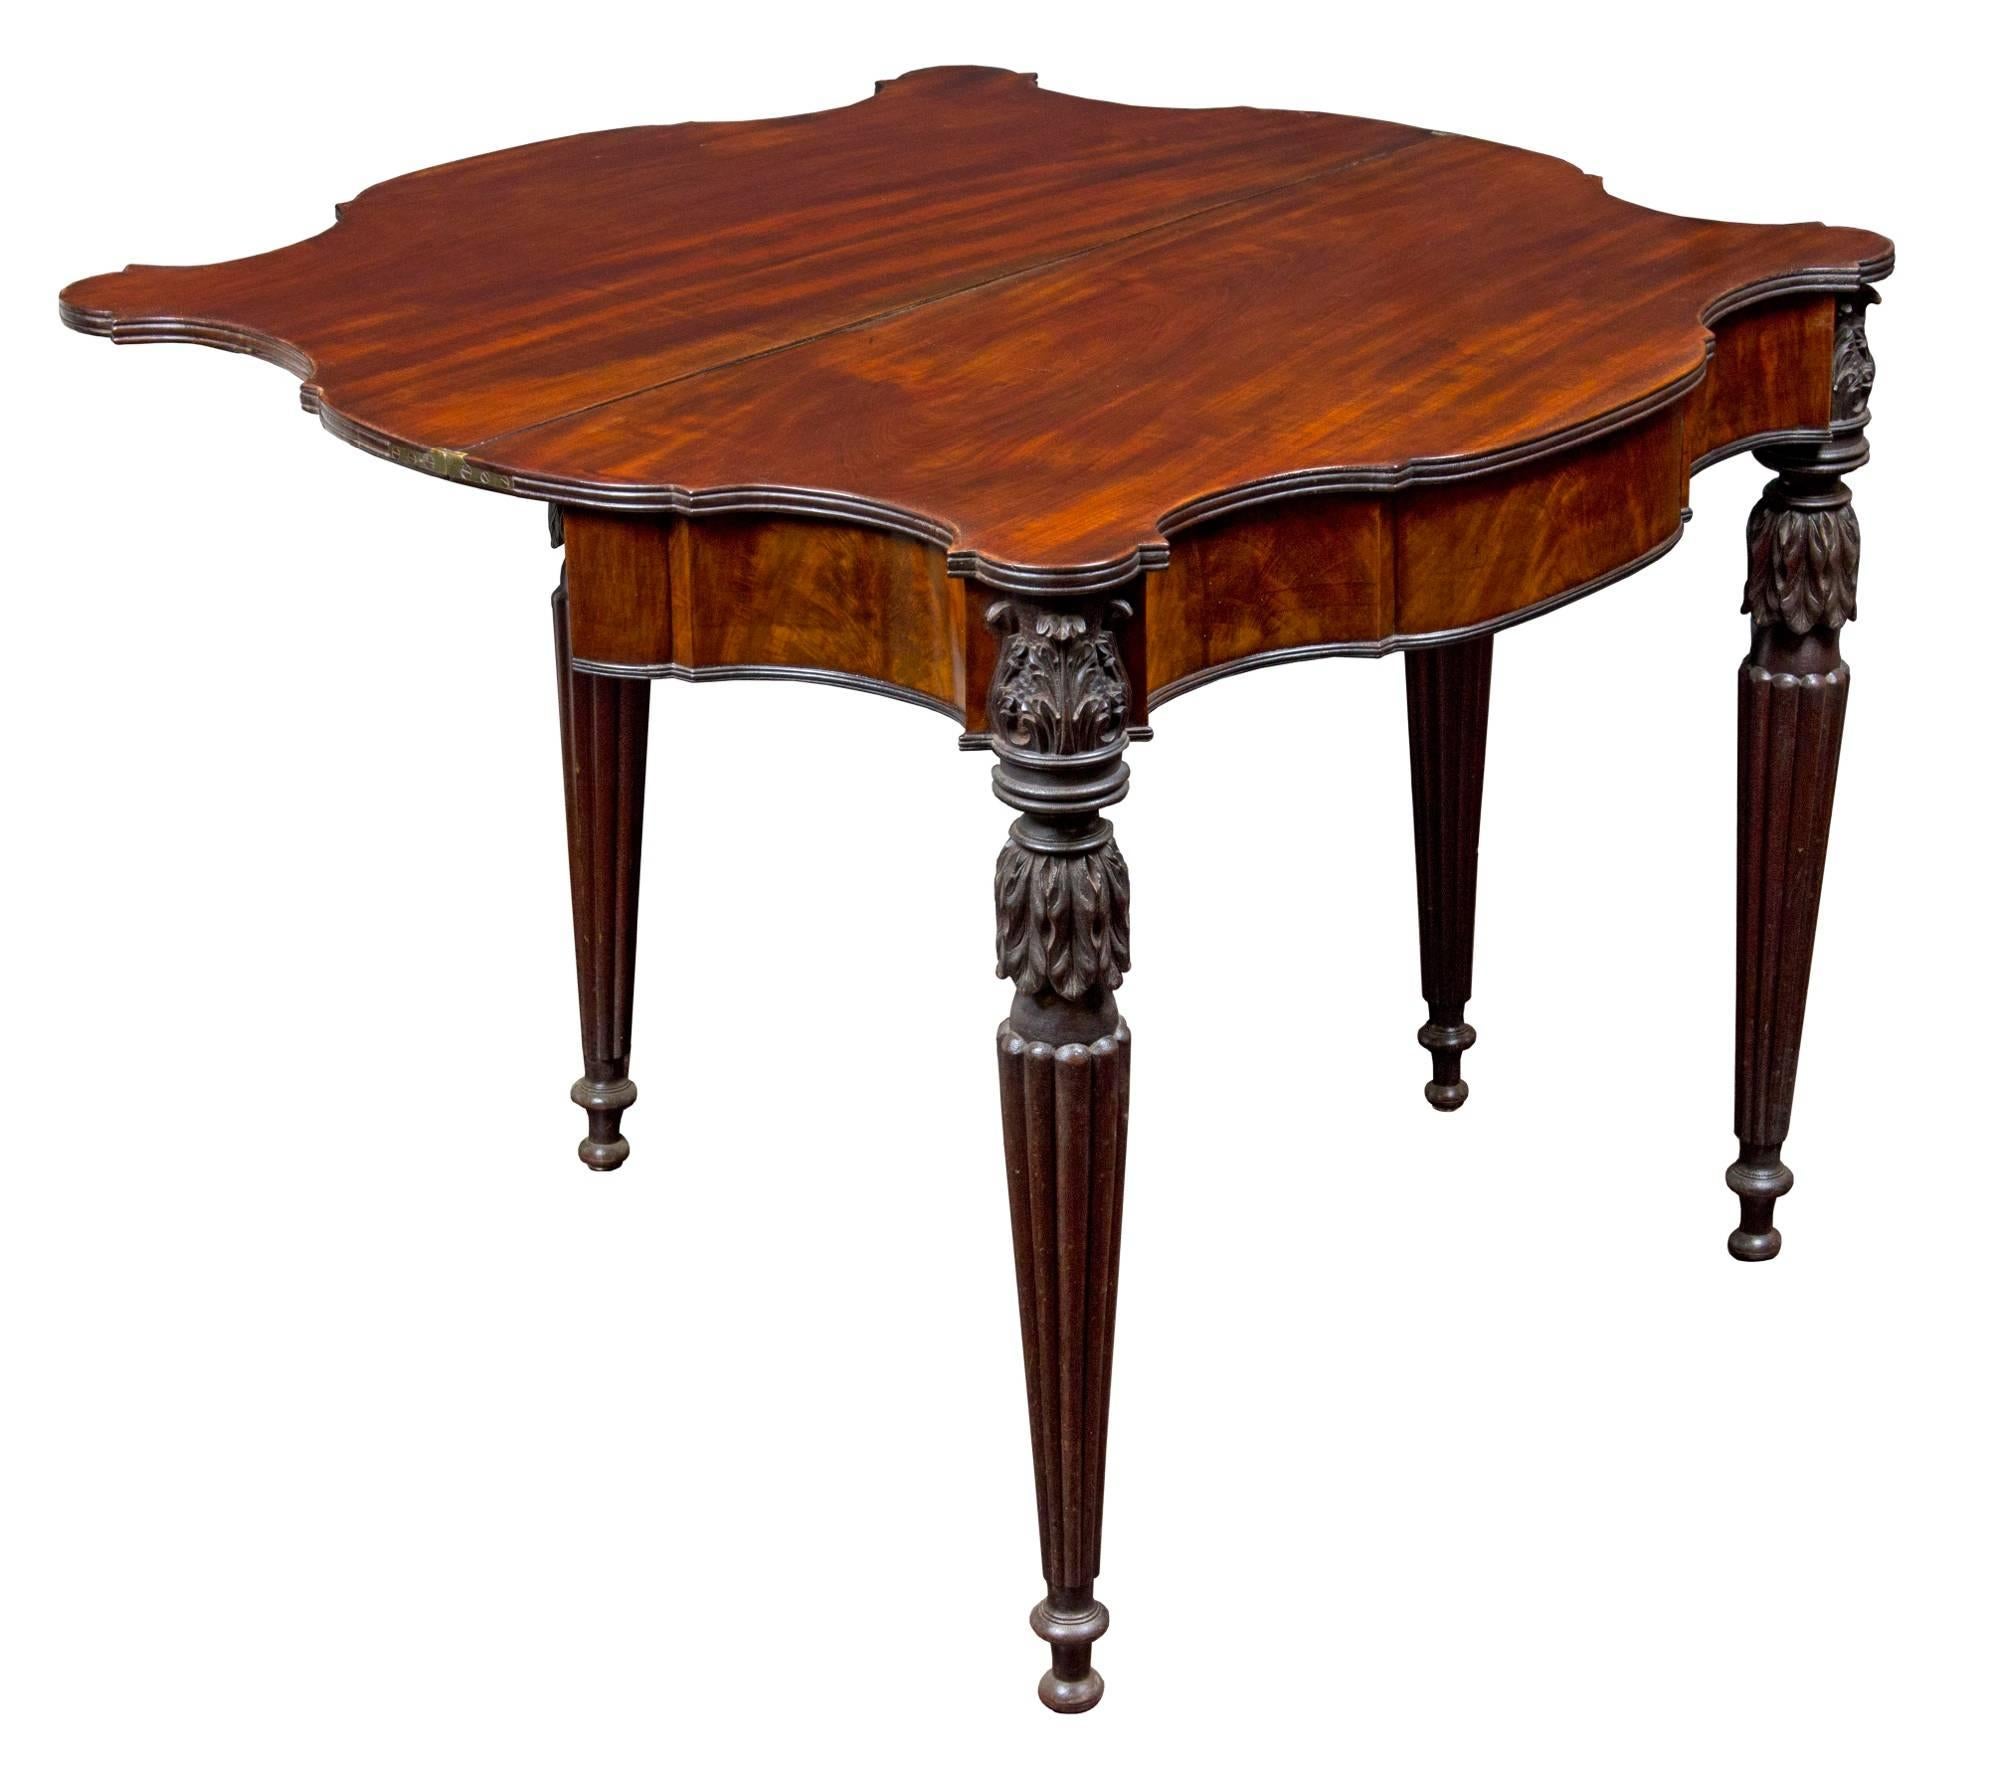 Outstanding Mahogany Sheraton Carved Card Table, Salem, 1810-1815 In Excellent Condition For Sale In Providence, RI